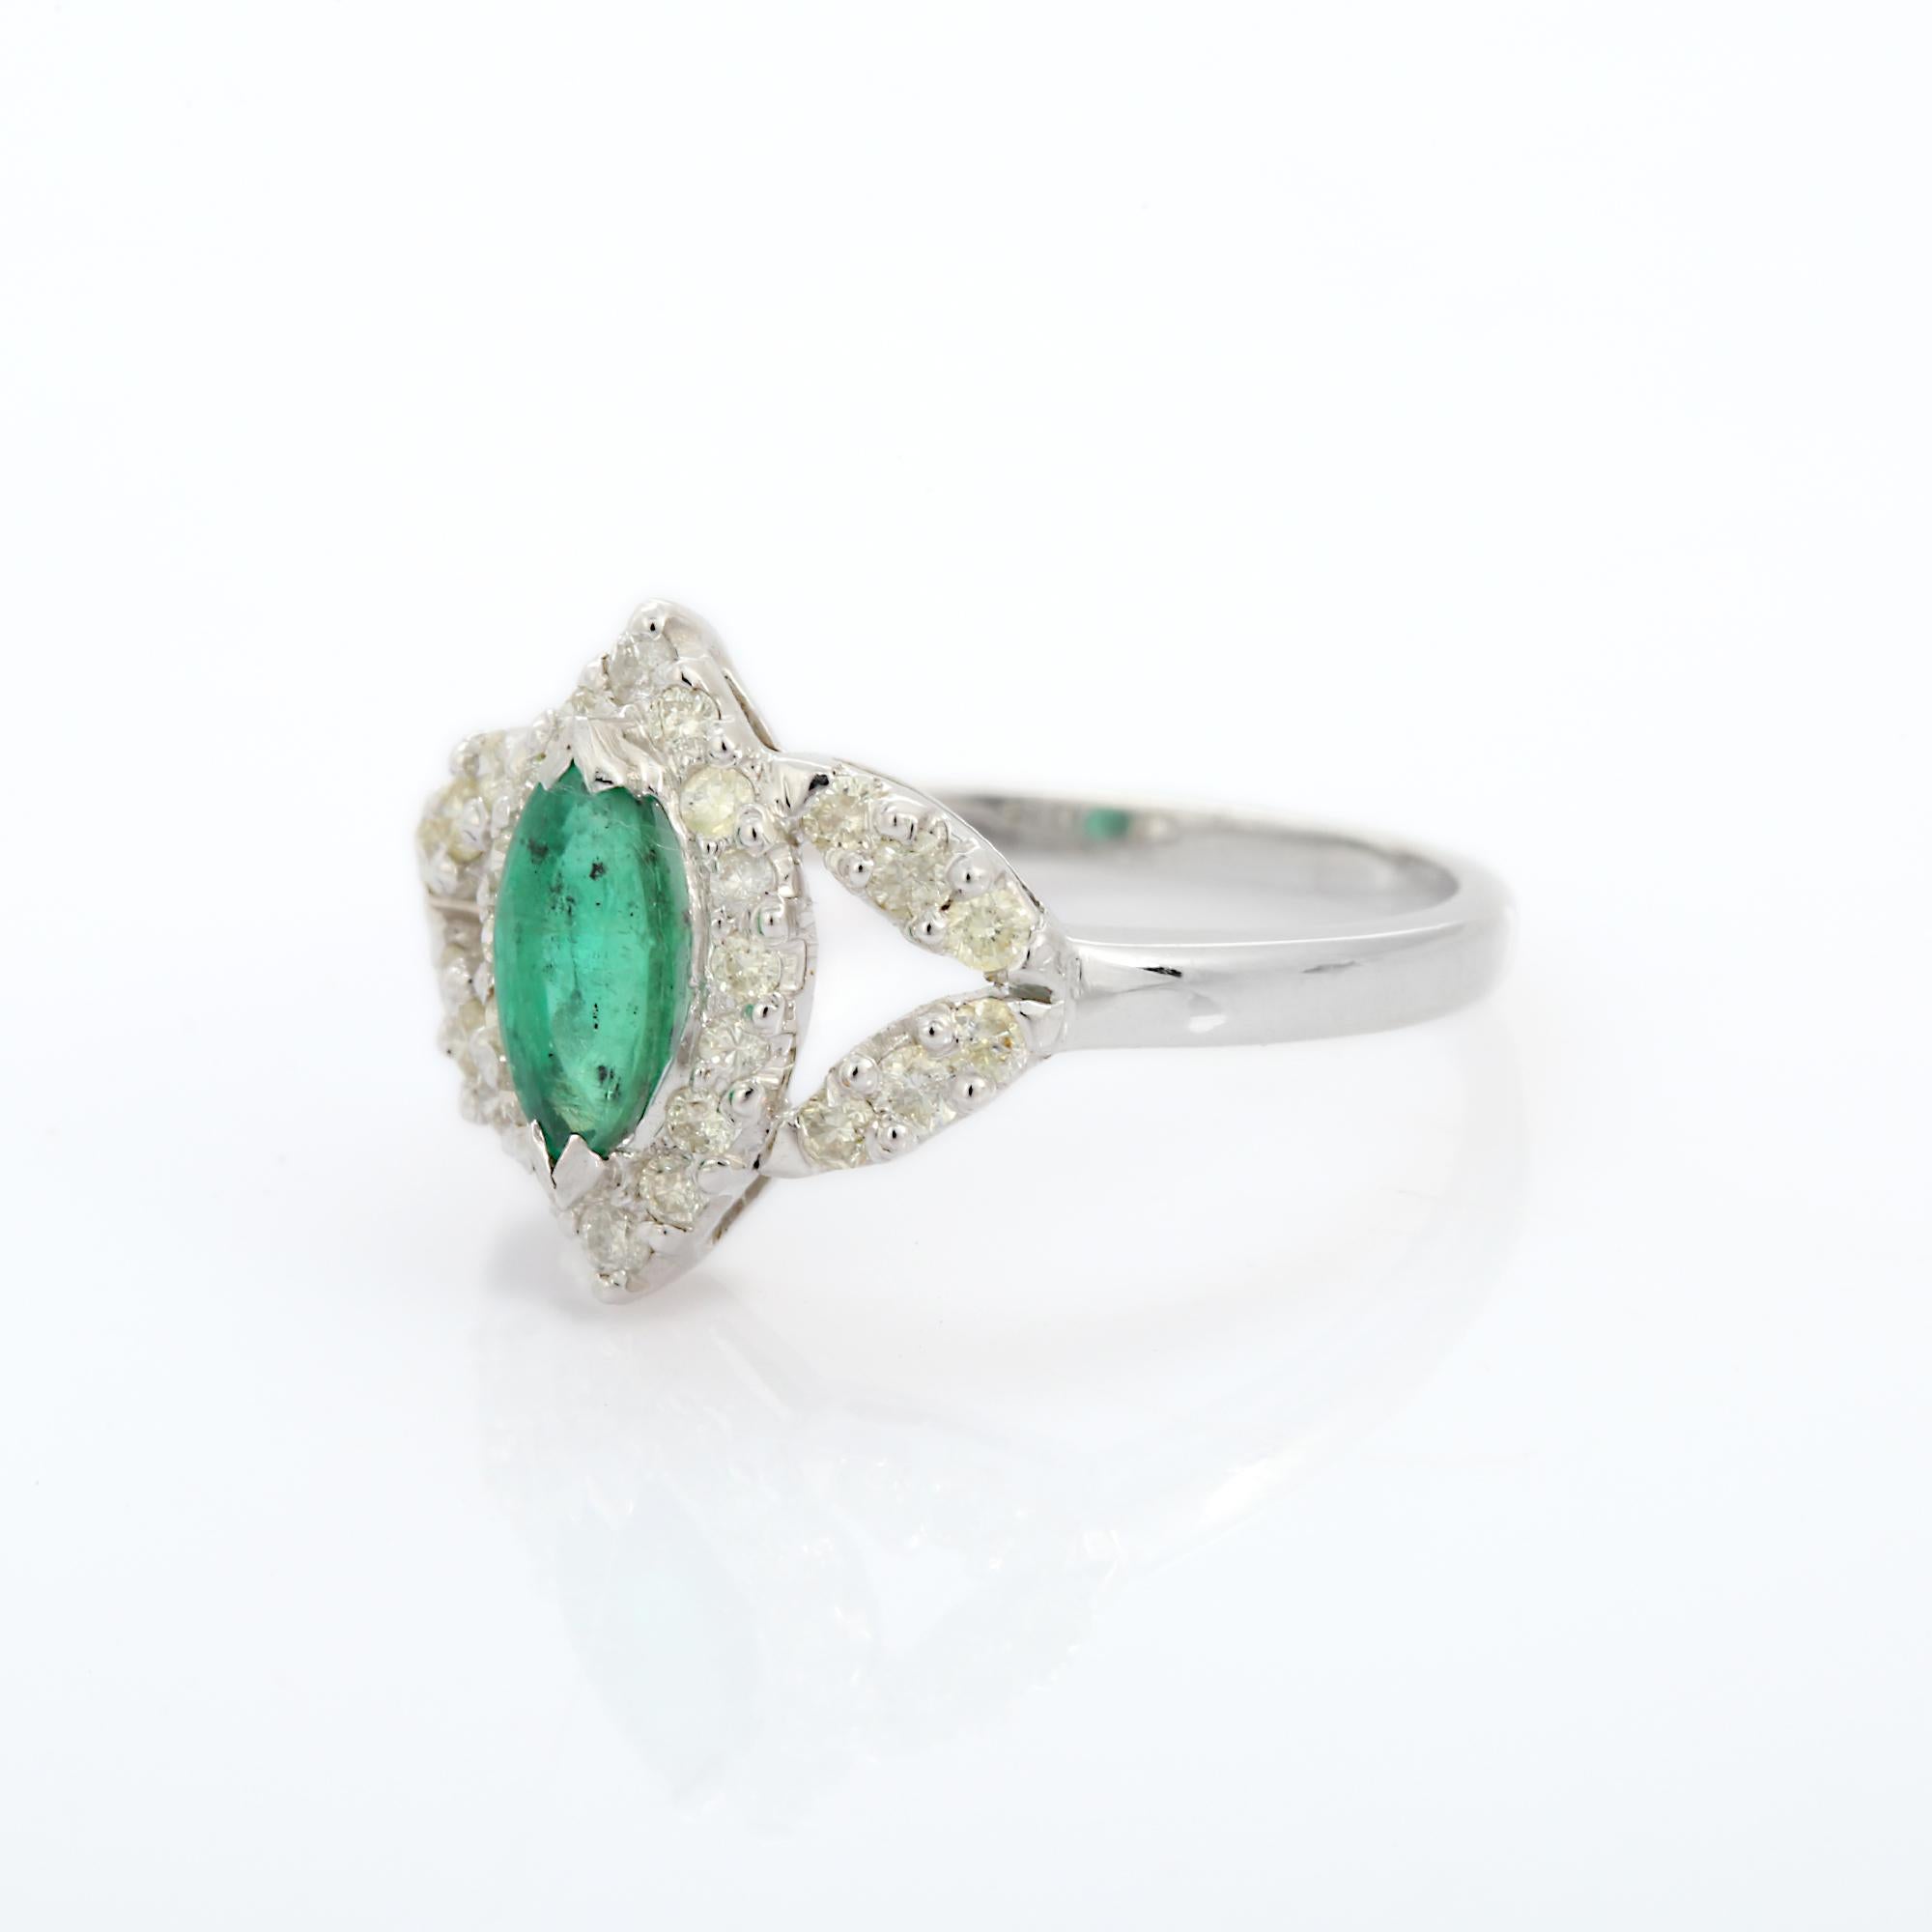 For Sale:  Natural Emerald Gemstone Wedding Ring with Diamonds in 18 Karat Solid White Gold 2